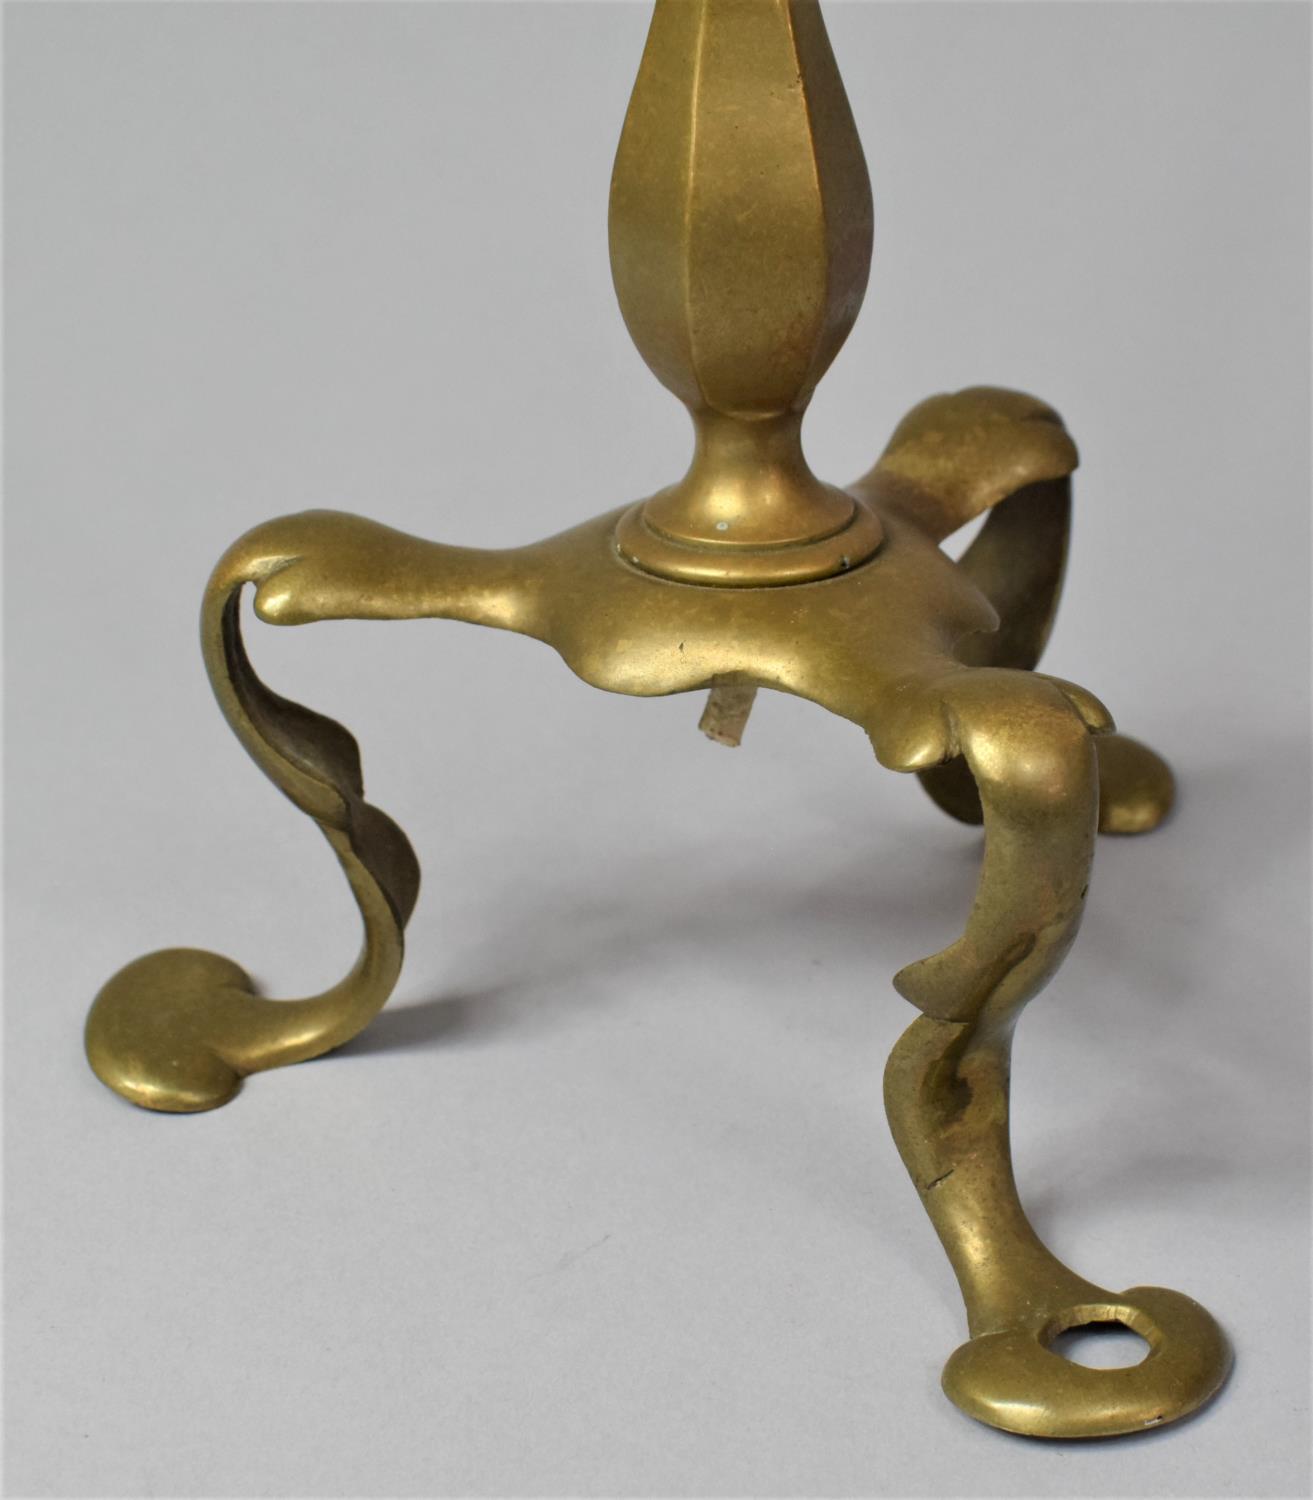 An Early 20th Century Brass Pullman Carriage Table Lamp, with Three Scrolled Feet, 32cm high - Image 2 of 4